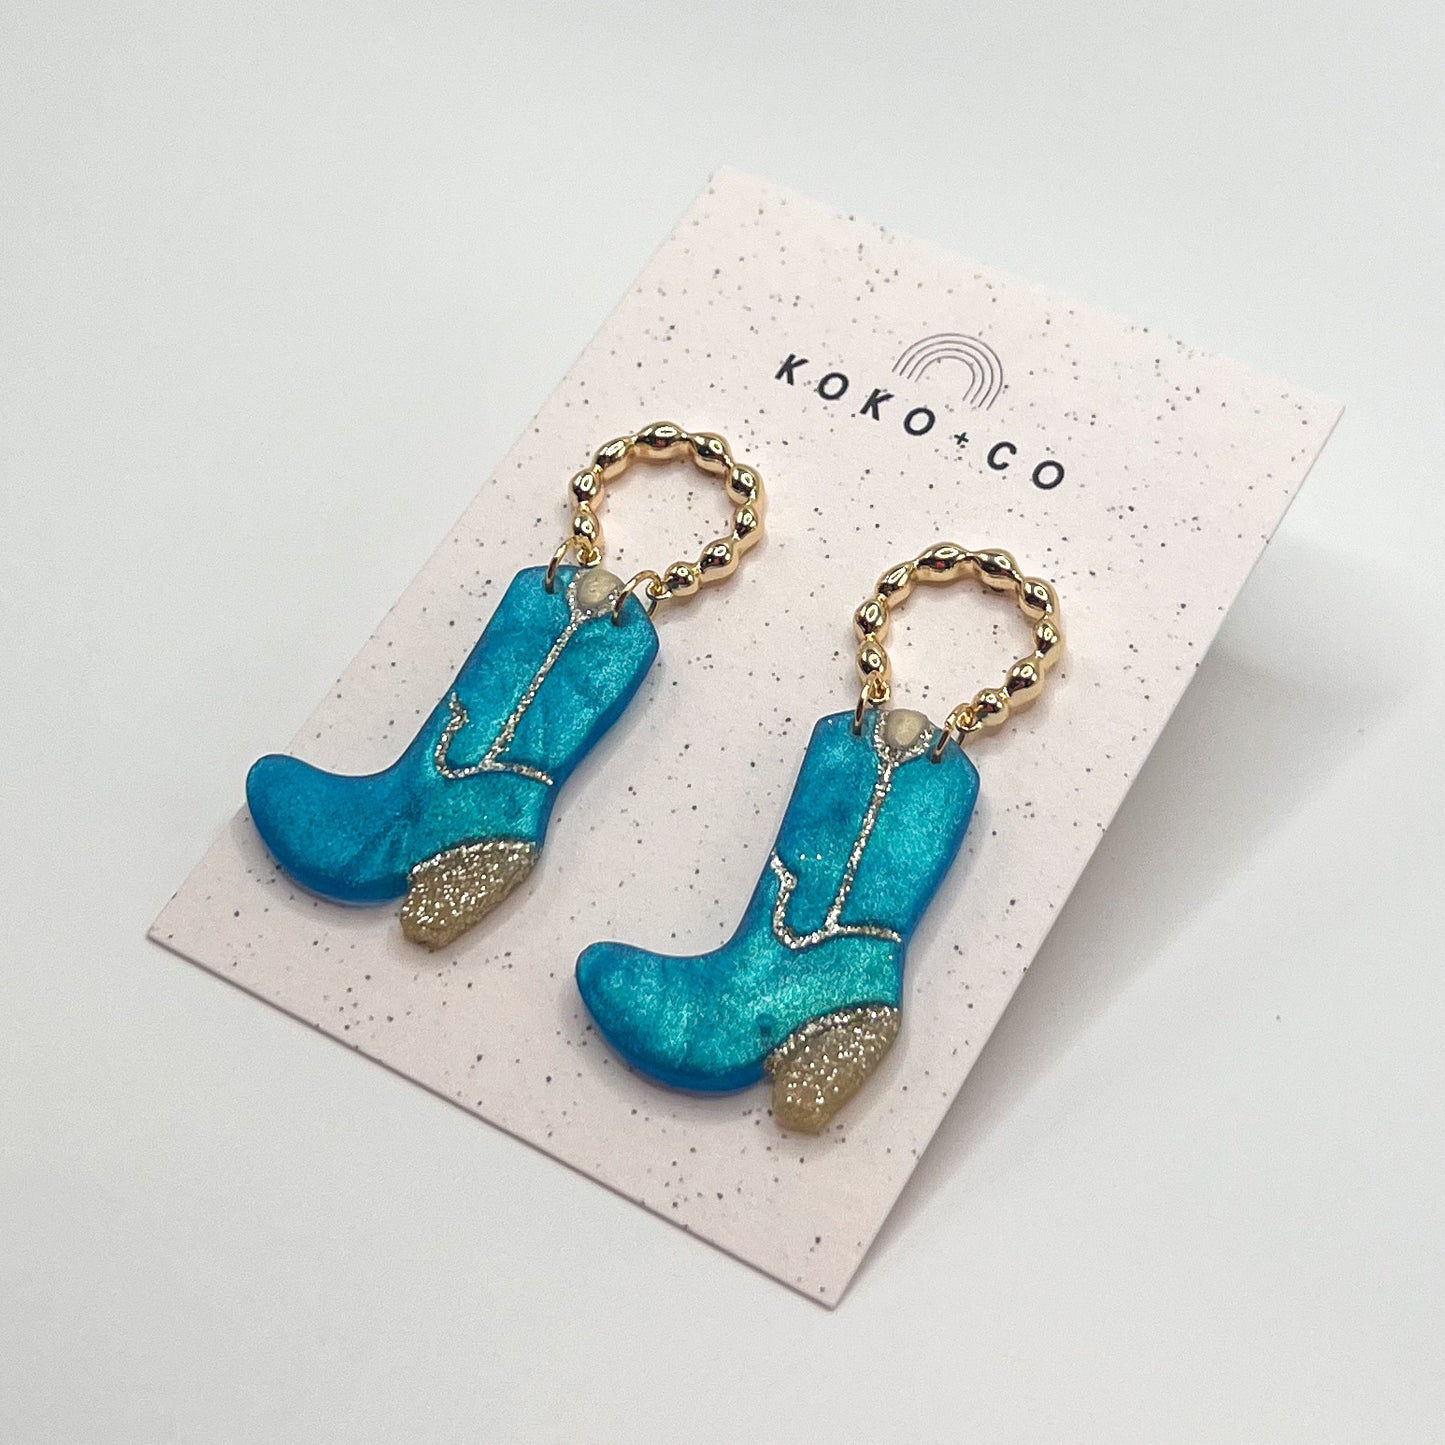 Cowgirl Boot Earrings in Turquoise